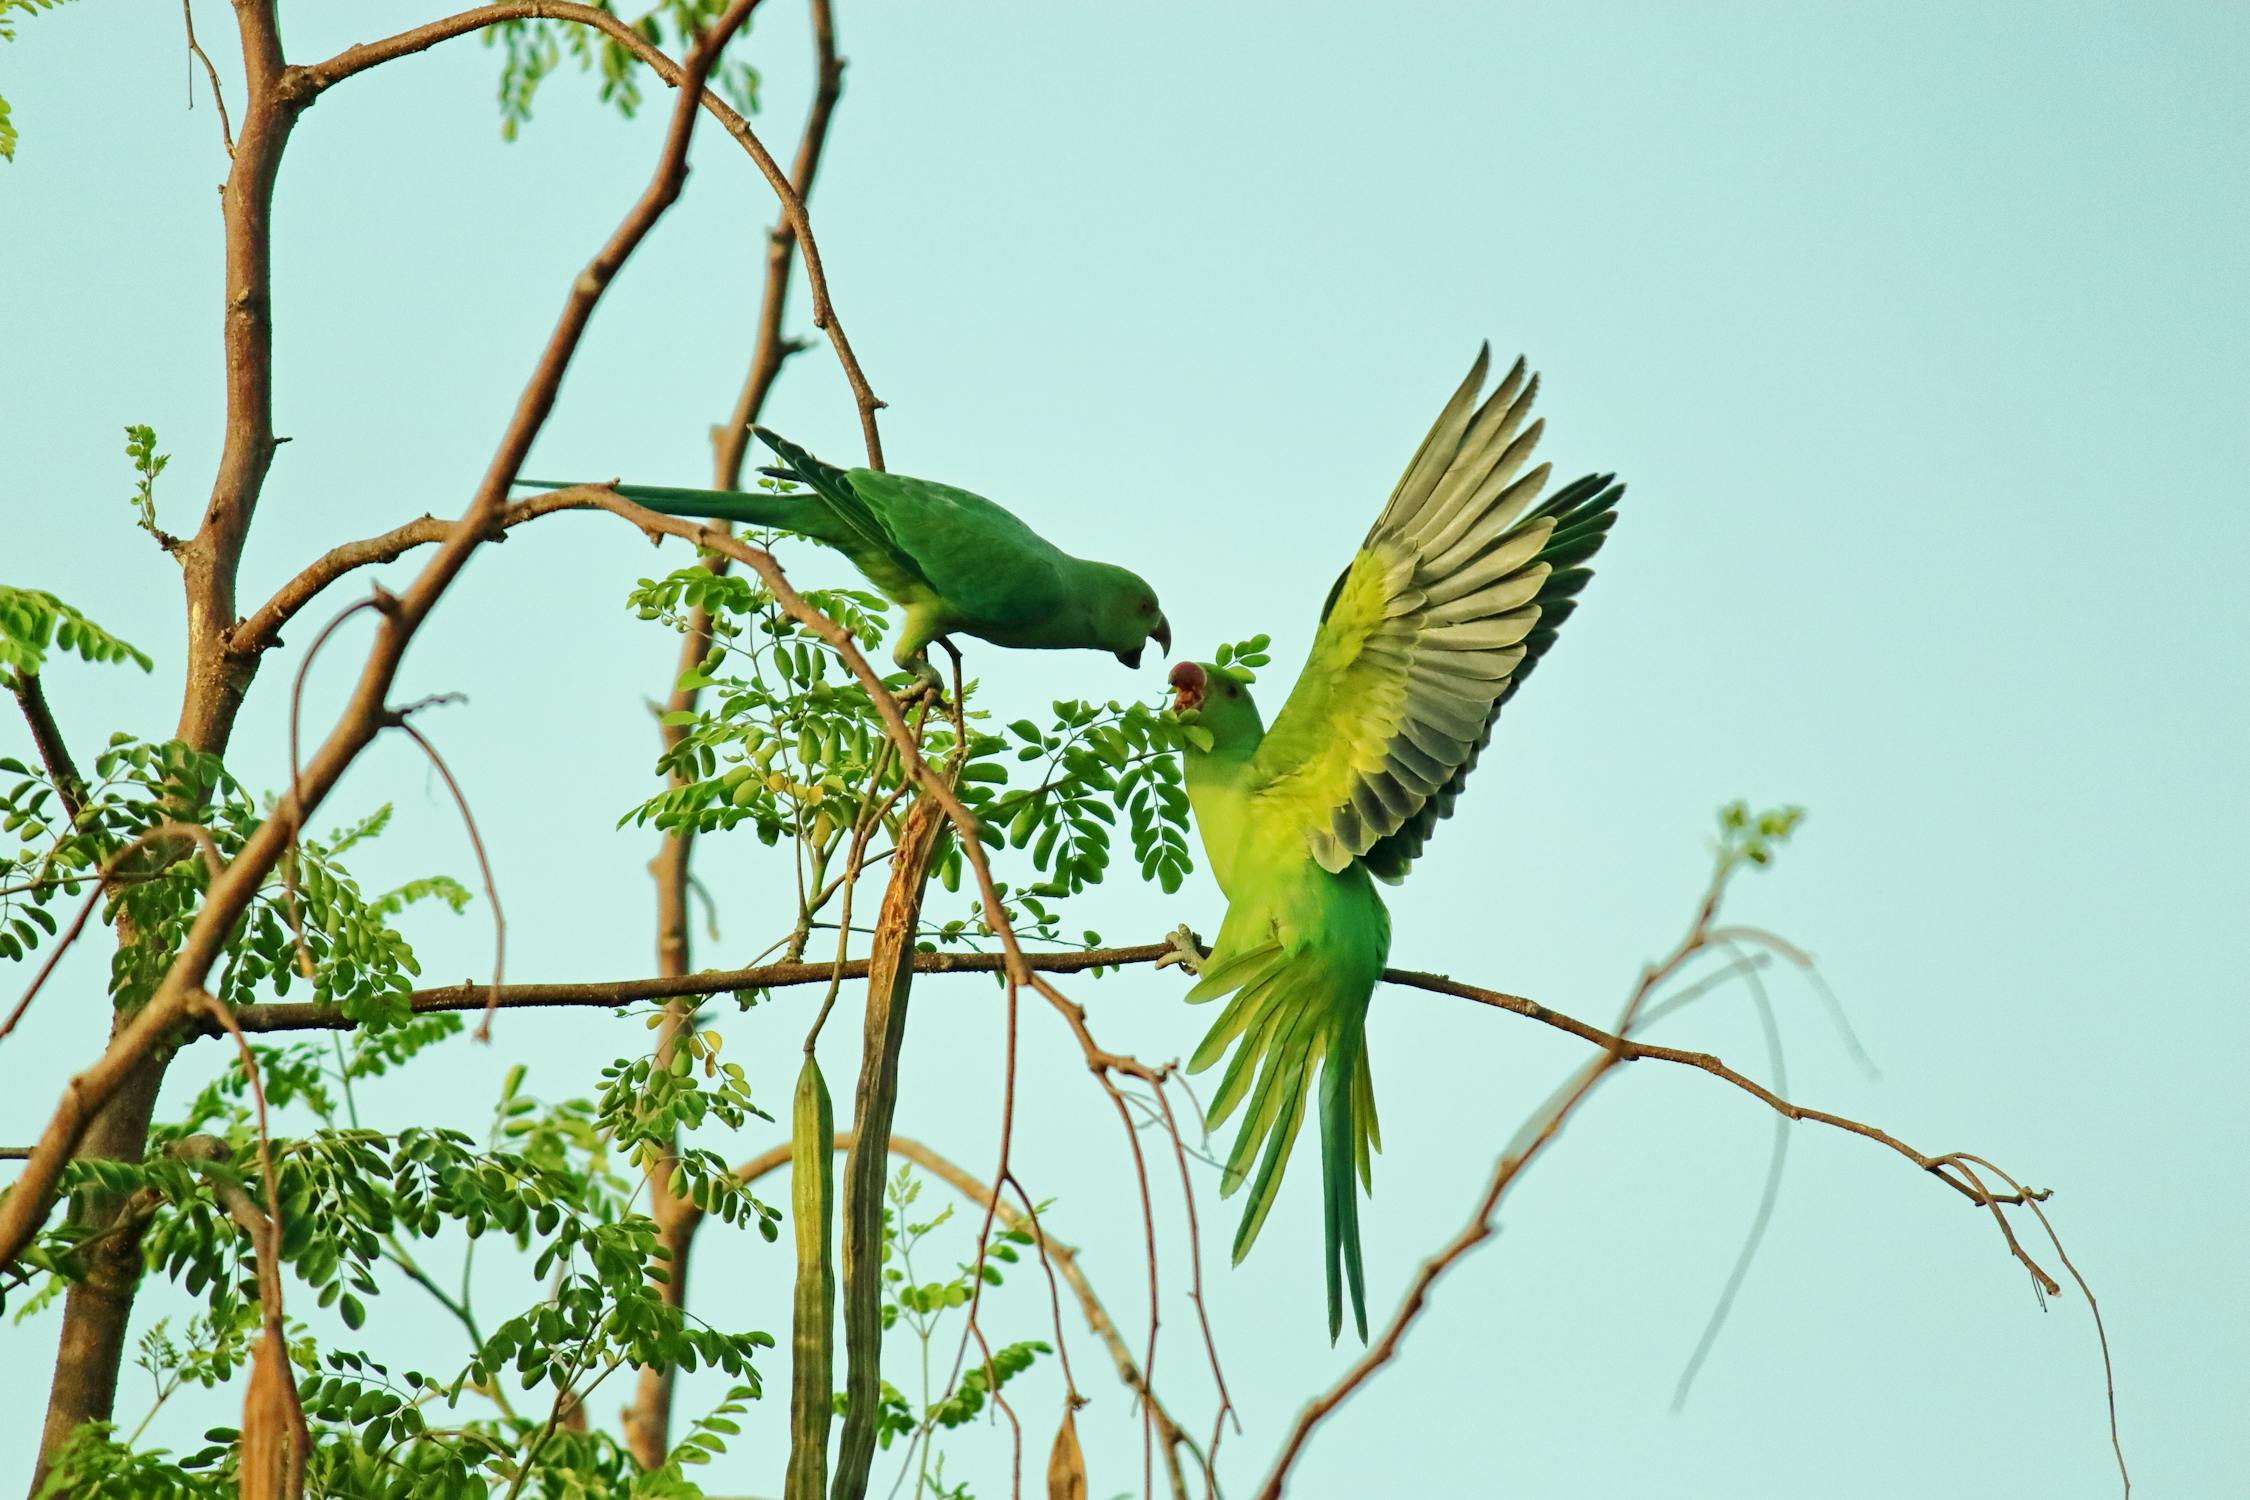 Parrot Photo by Aashutosh Sharma from Pexels: https://www.pexels.com/photo/two-green-parrots-1098254/